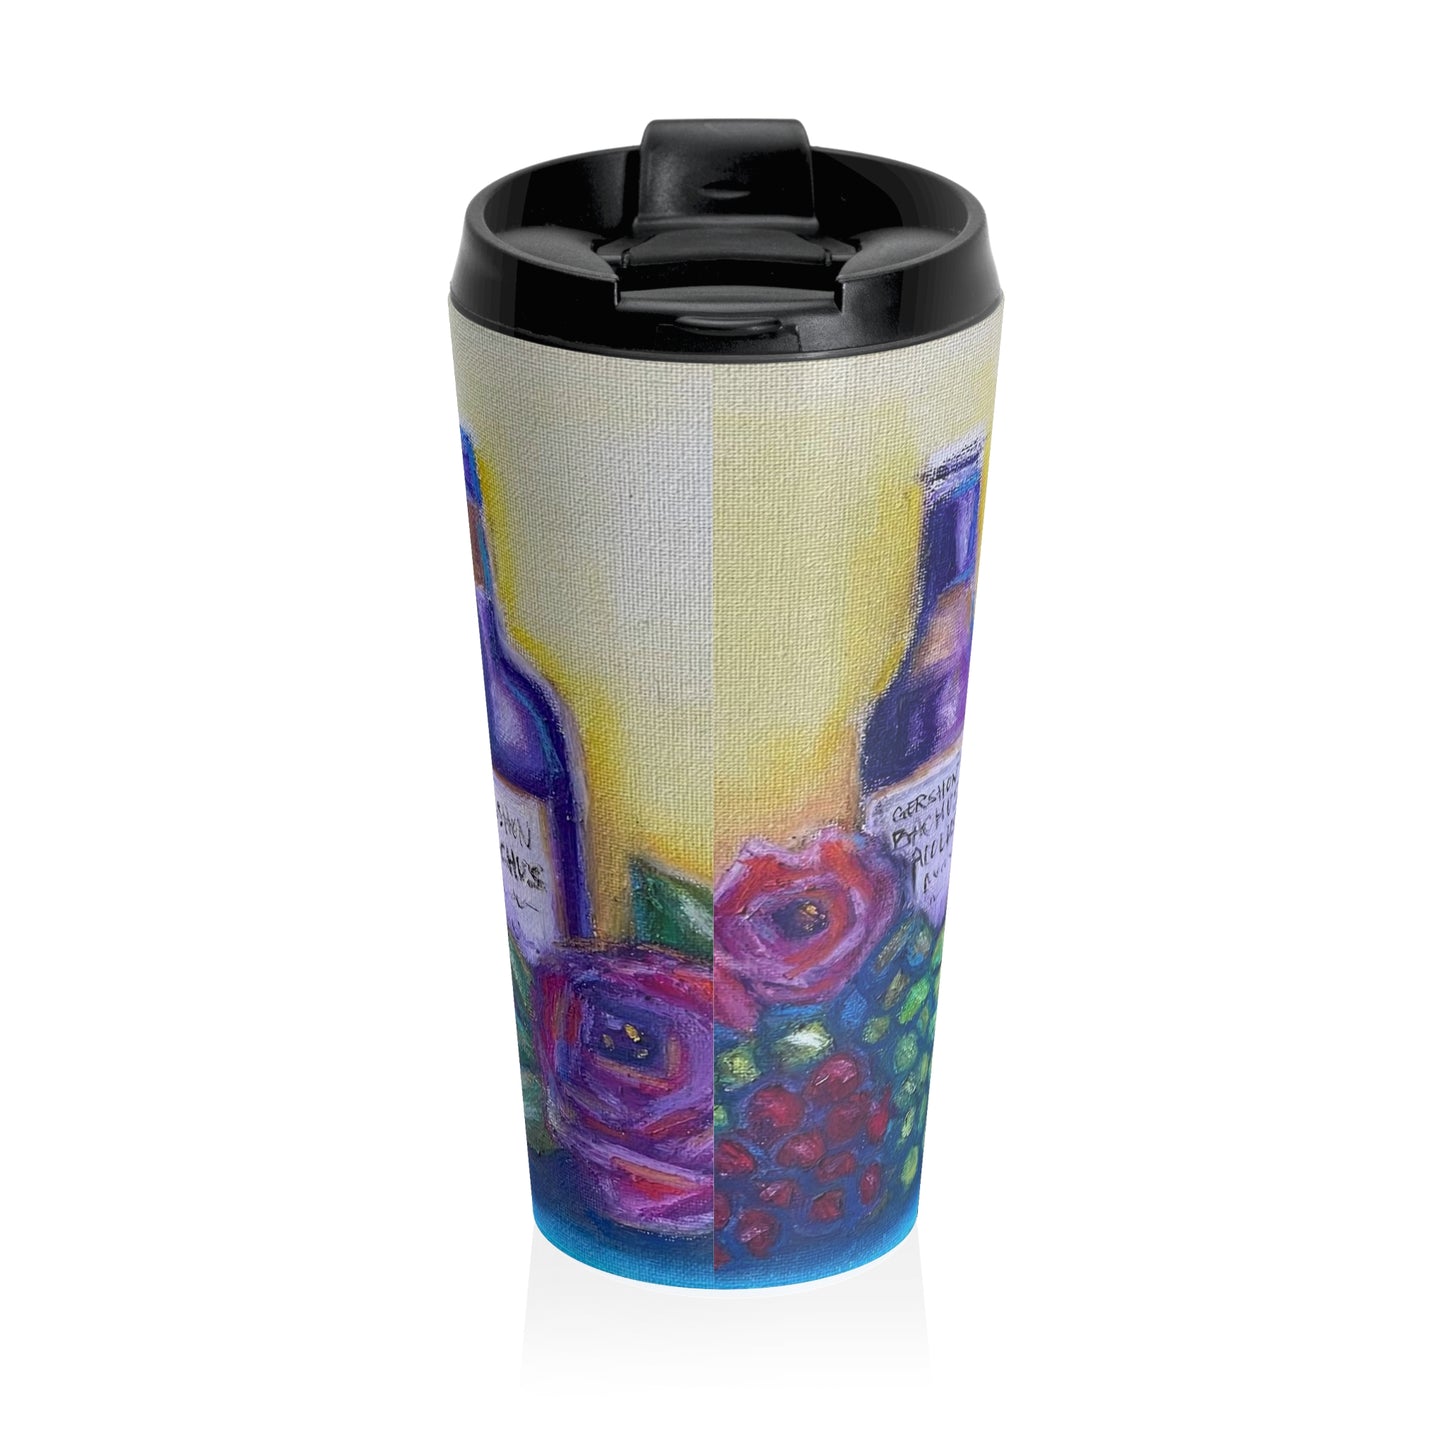 GBV Wine and Roses Stainless Steel Travel Mug